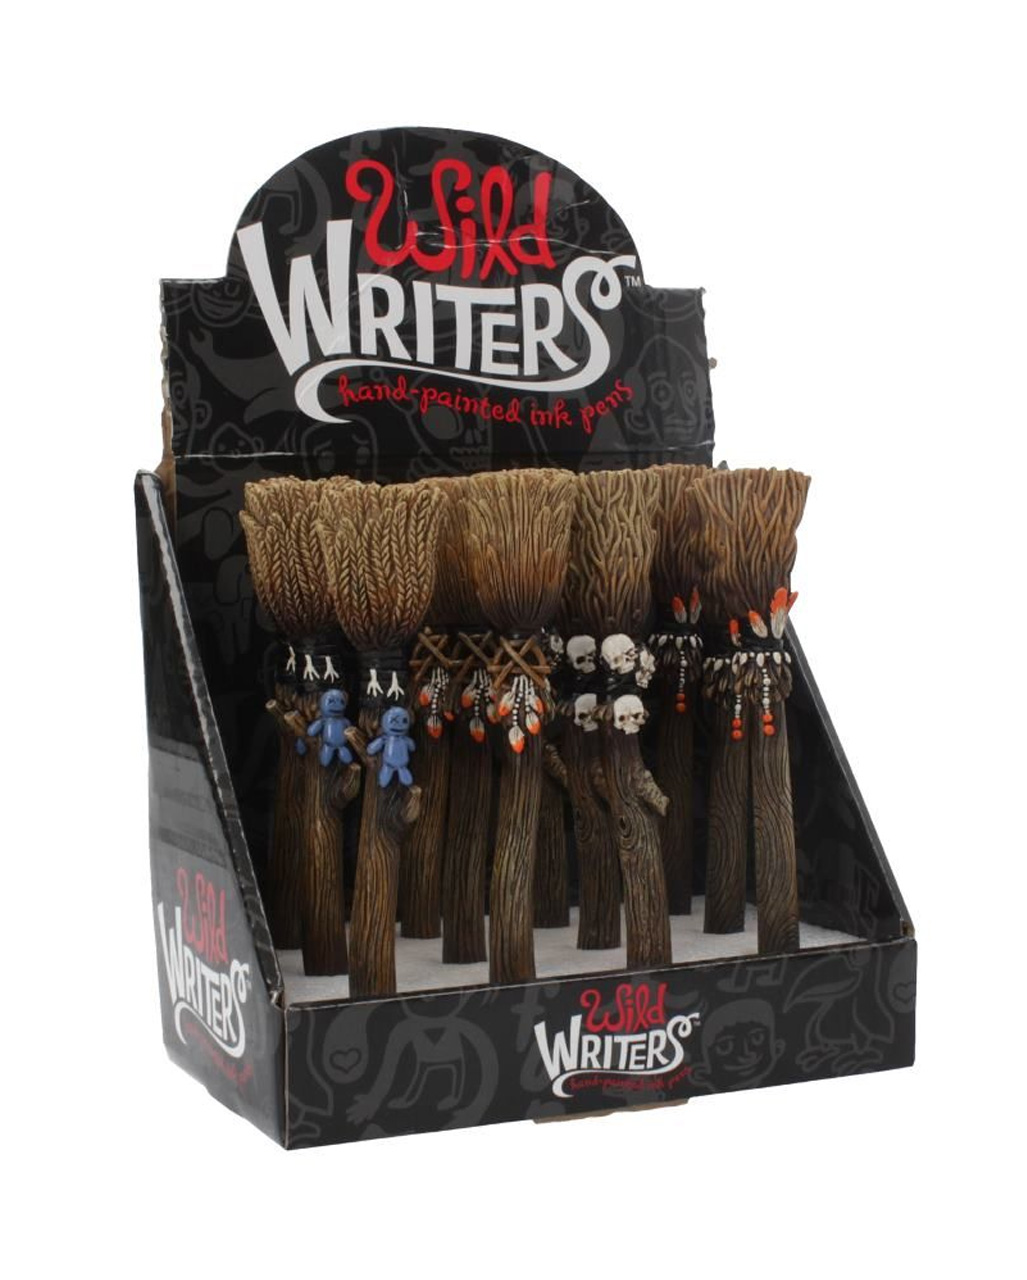 Century Novelty Witches Broom Pens